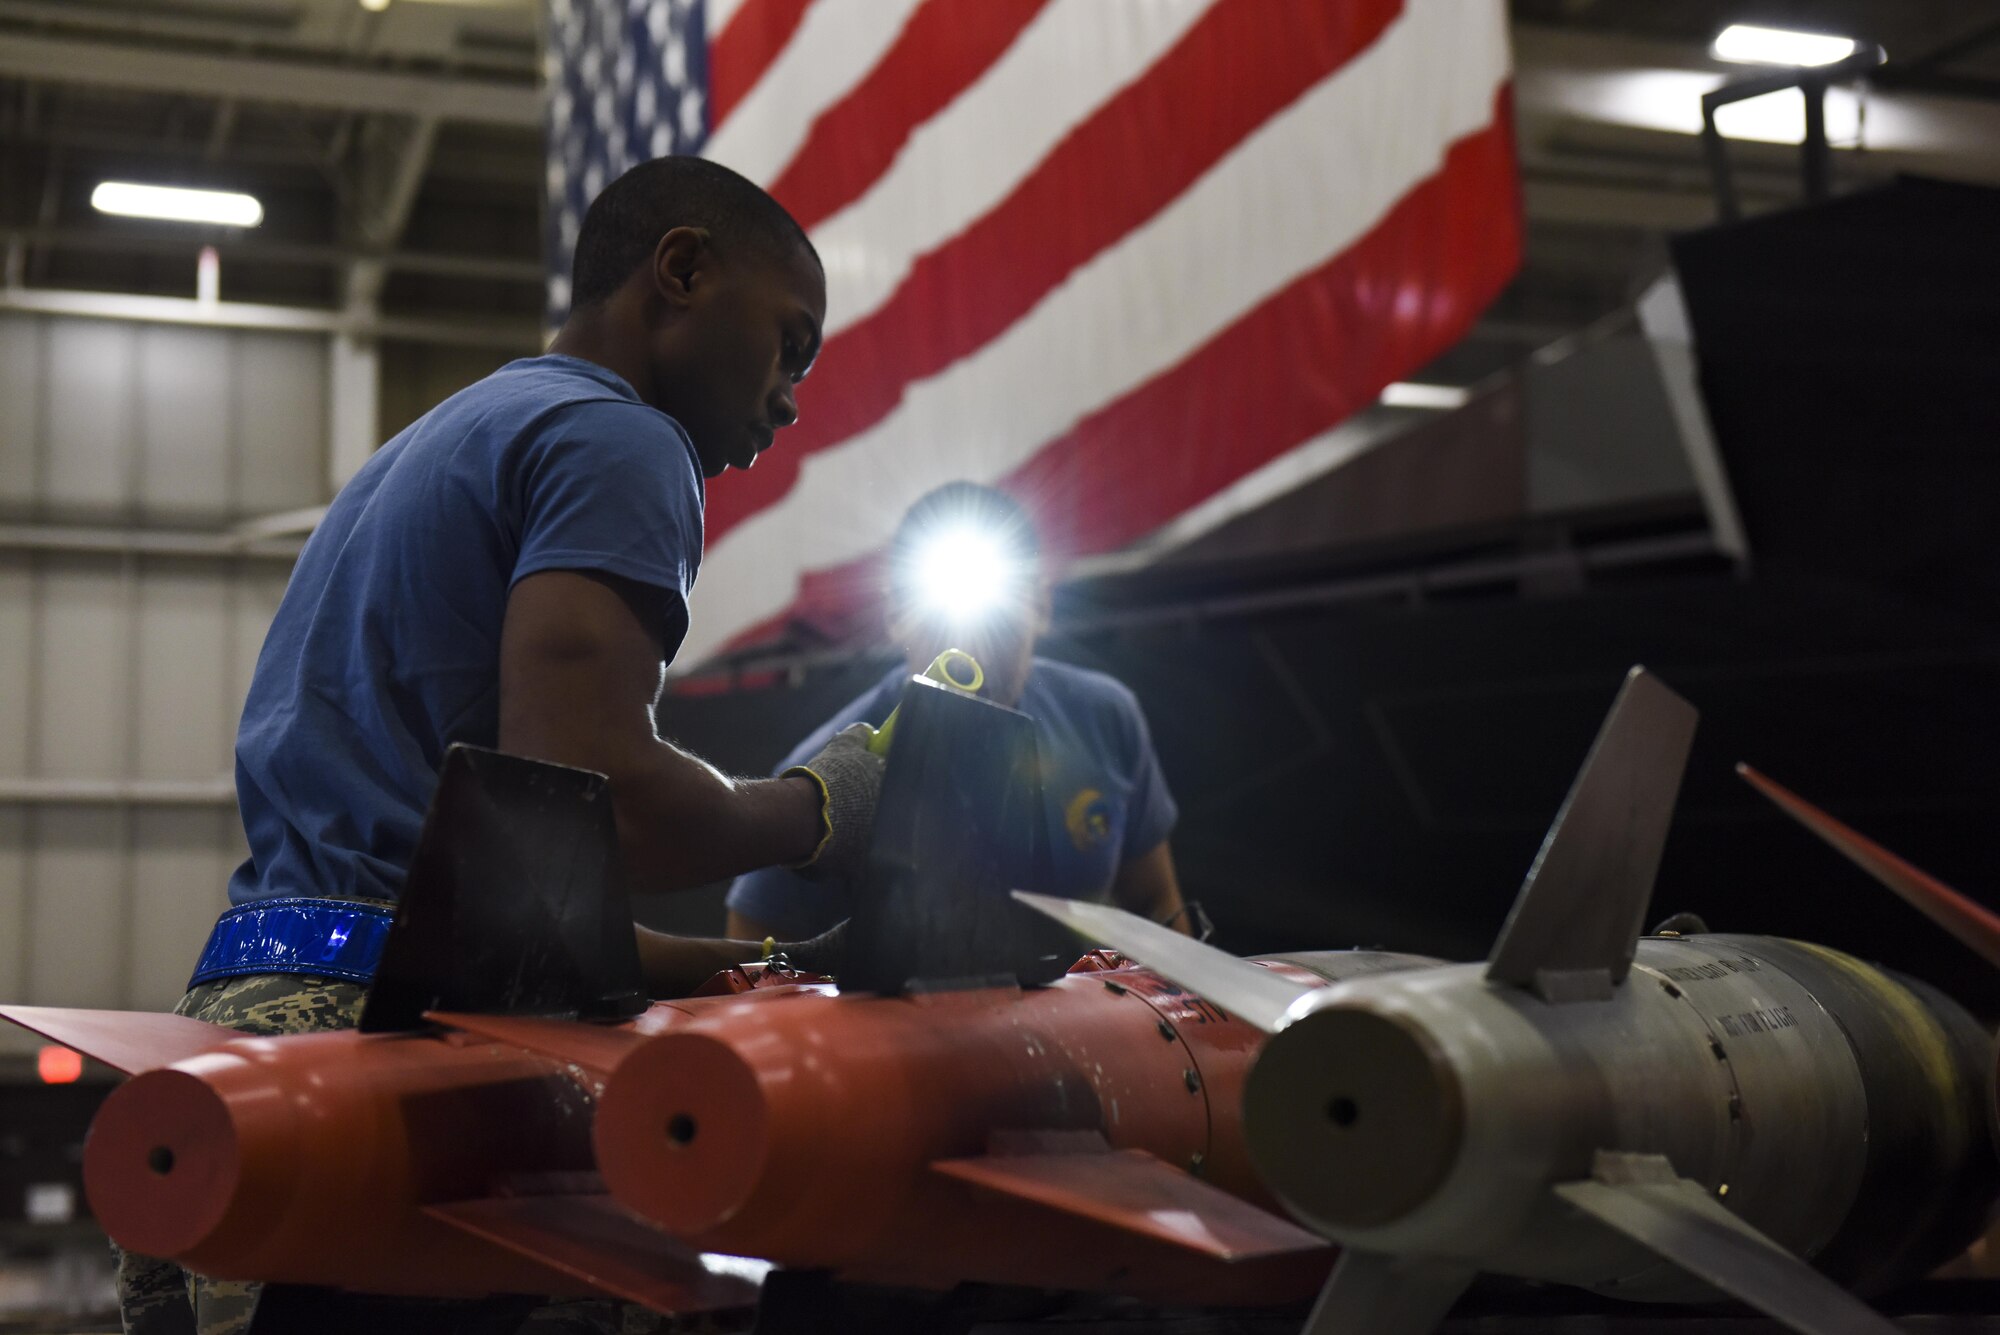 U.S. Air Force Airman 1st Class Chase Davis, a weapons load crew 3-member assigned to the 13th Aircraft Maintenance Unit, examines a GBU-38 during the fourth quarter load competition at Whiteman Air Force Base, Mo., Jan. 6, 2017. Every three months the most proficient crews from each aircraft maintenance unit within the 509th and 131st Aircraft Maintenance Squadrons compete for the Load Crew of the Quarter award.